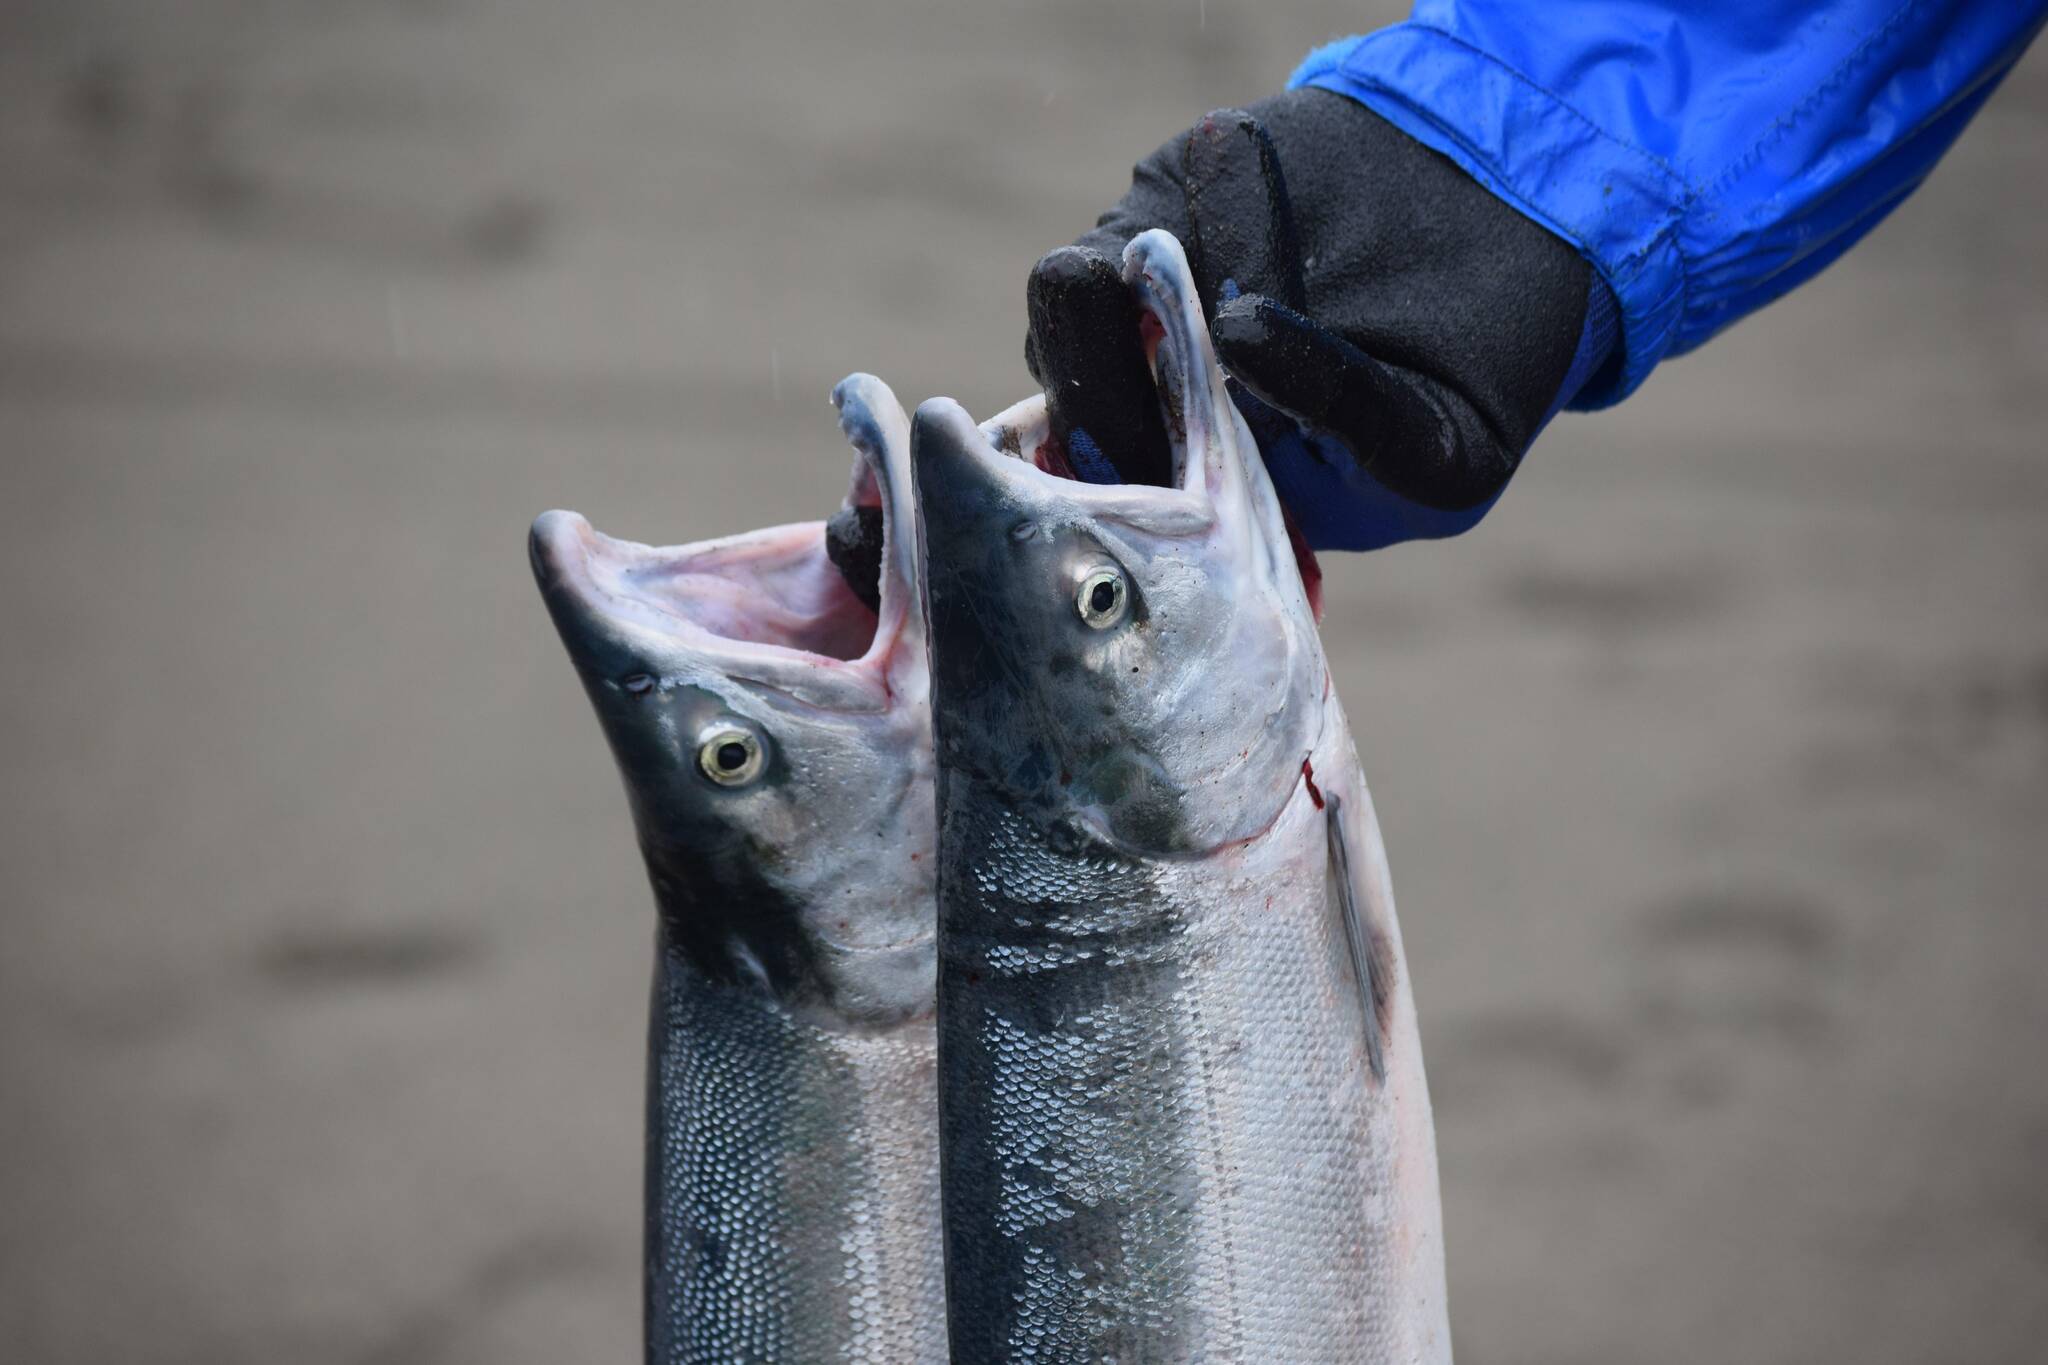 Raymond Bradbury preserves his salmon while dipnetting in the mouth of the Kenai River on Saturday, July 10, 2021. (Camille Botello/Peninsula Clarion file)